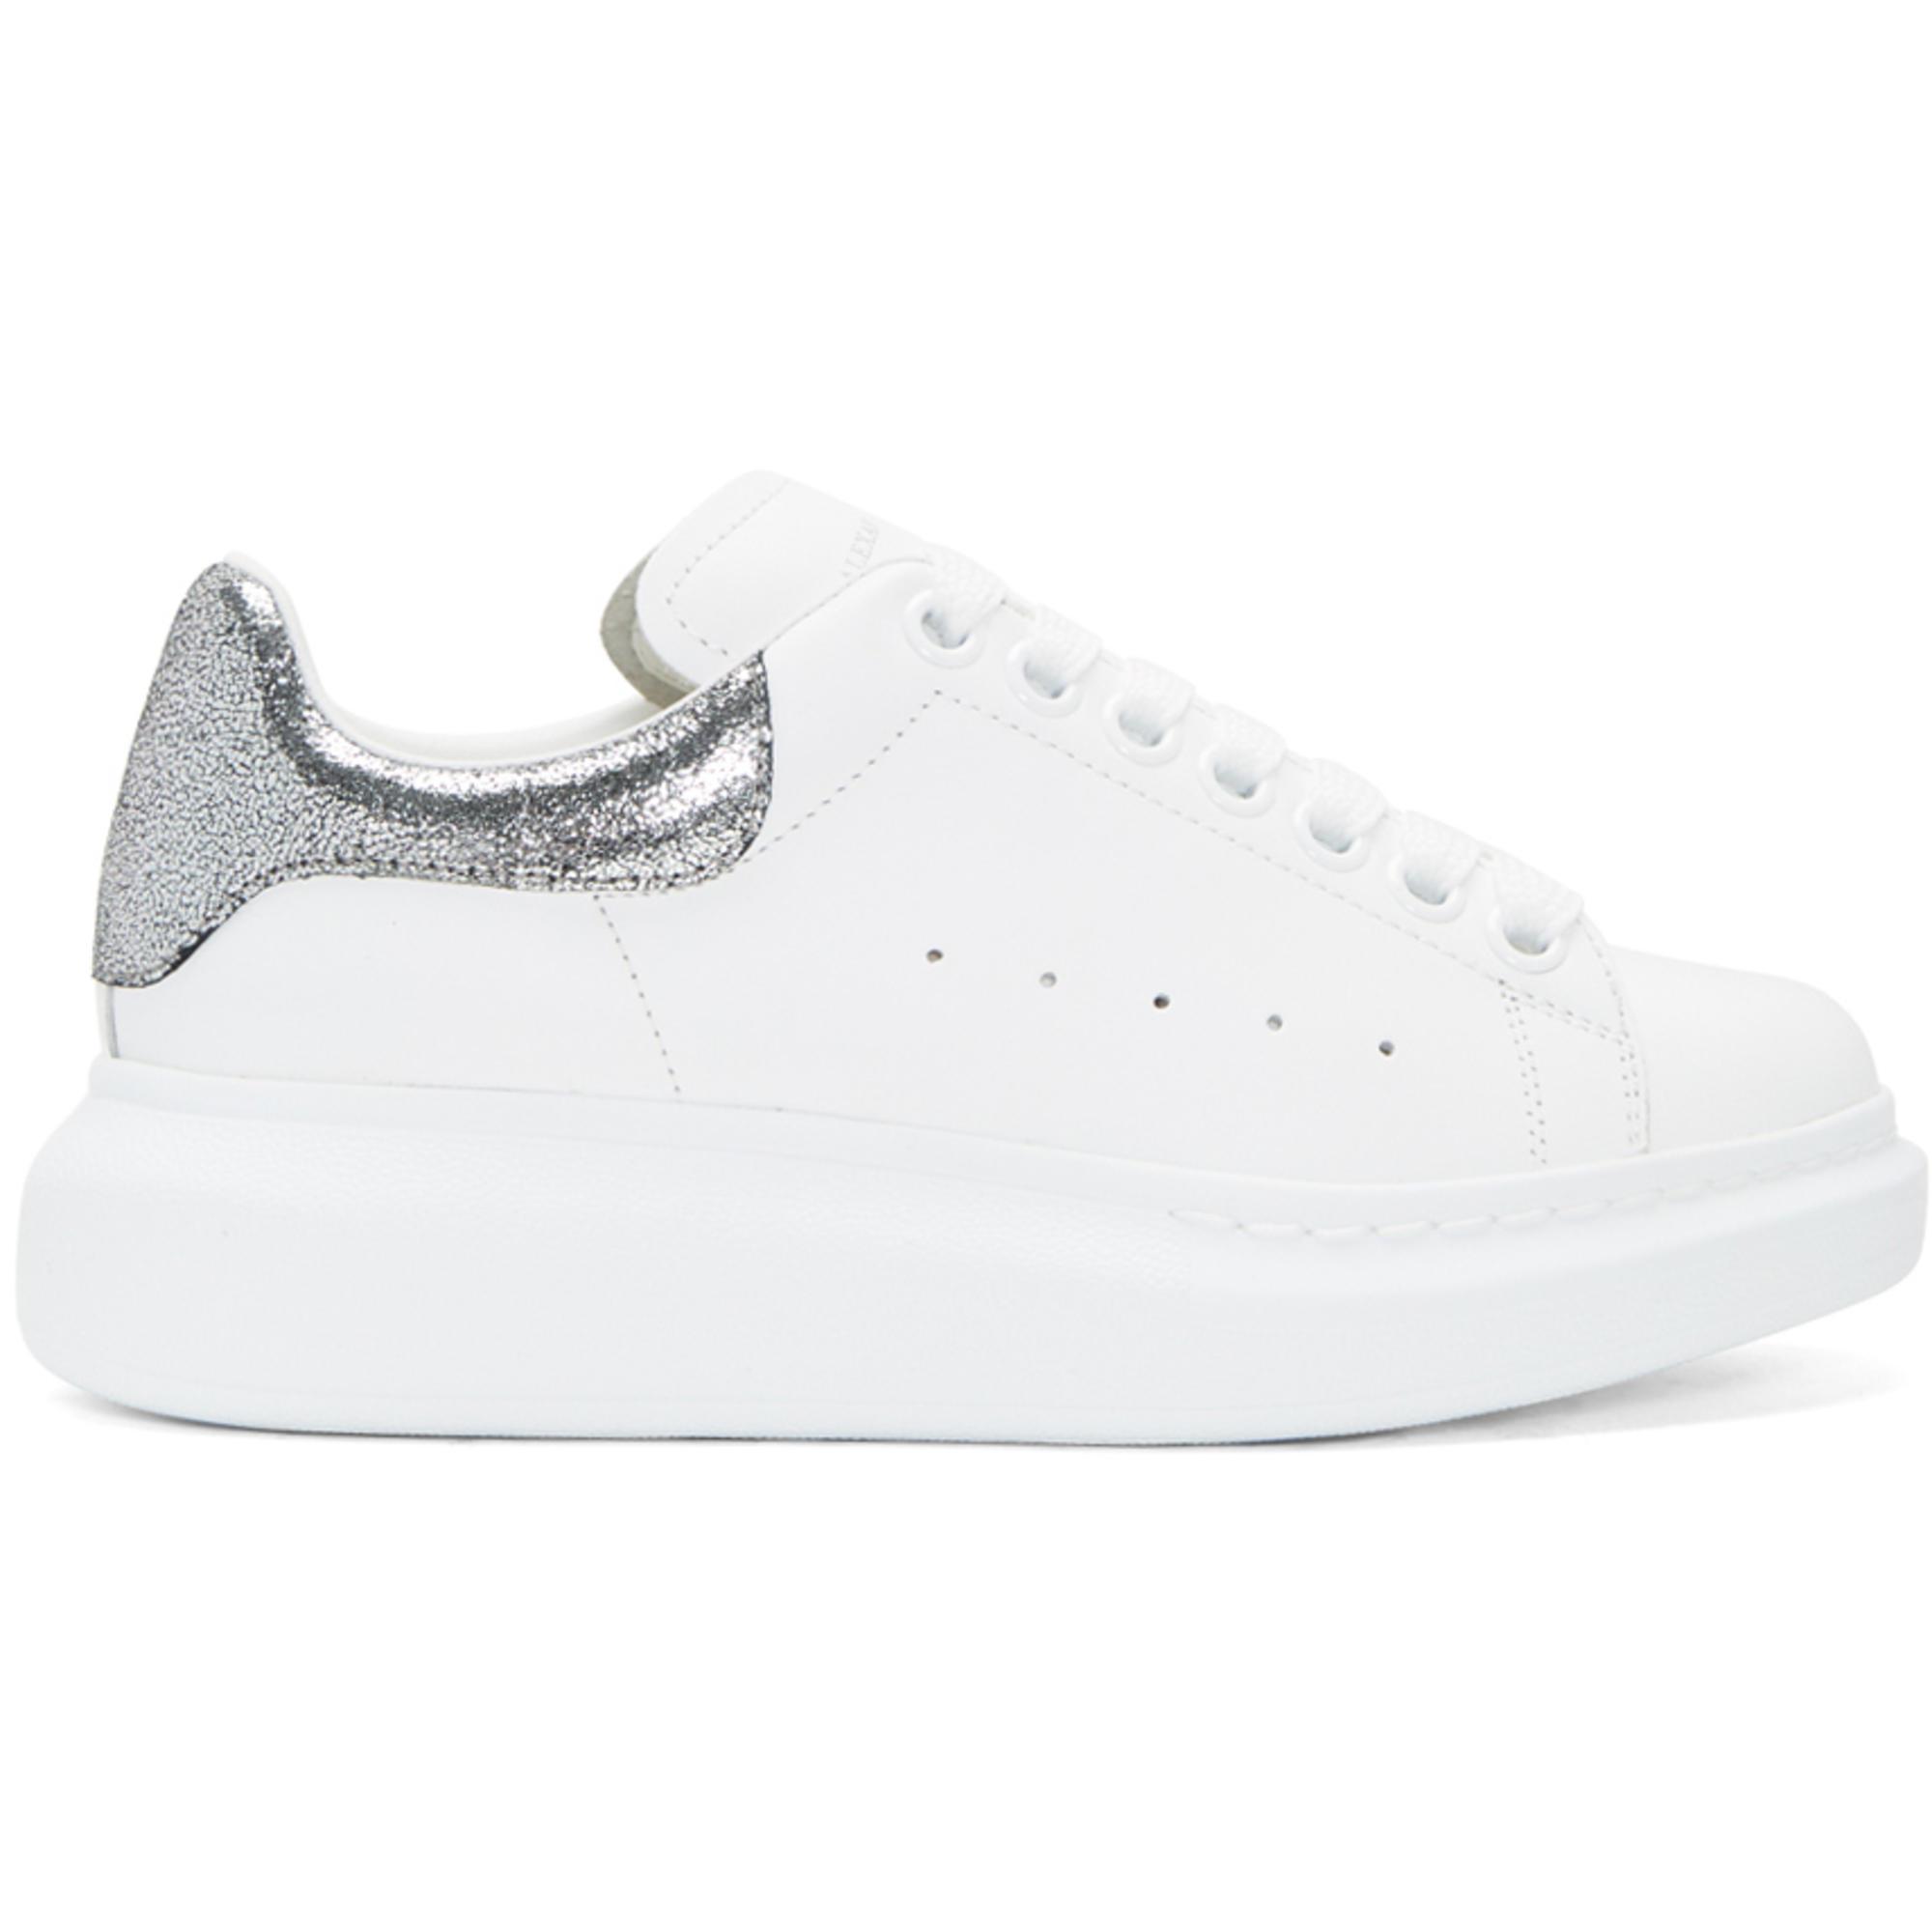 Lyst - Alexander mcqueen White & Silver Oversized Trainers in White